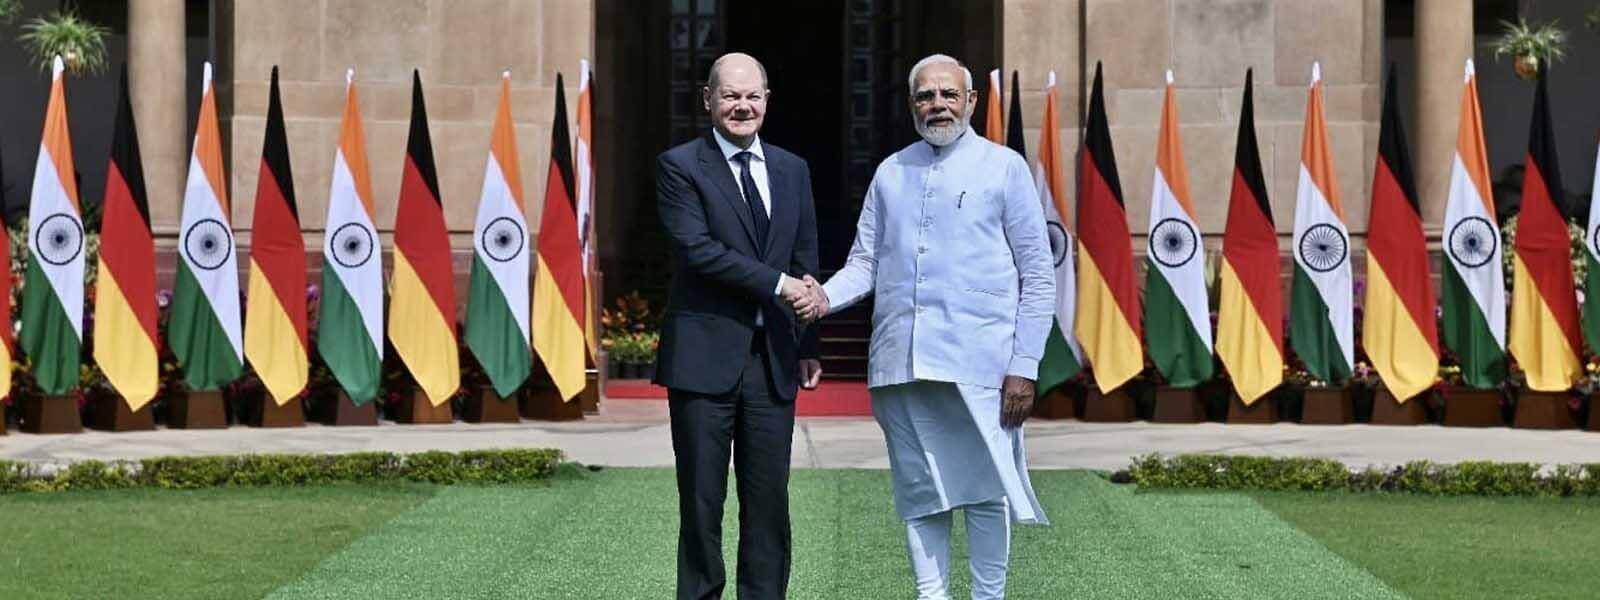 India Ready to Contribute to Ukraine Peace Process: PM Modi Tells Germany’s Scholz